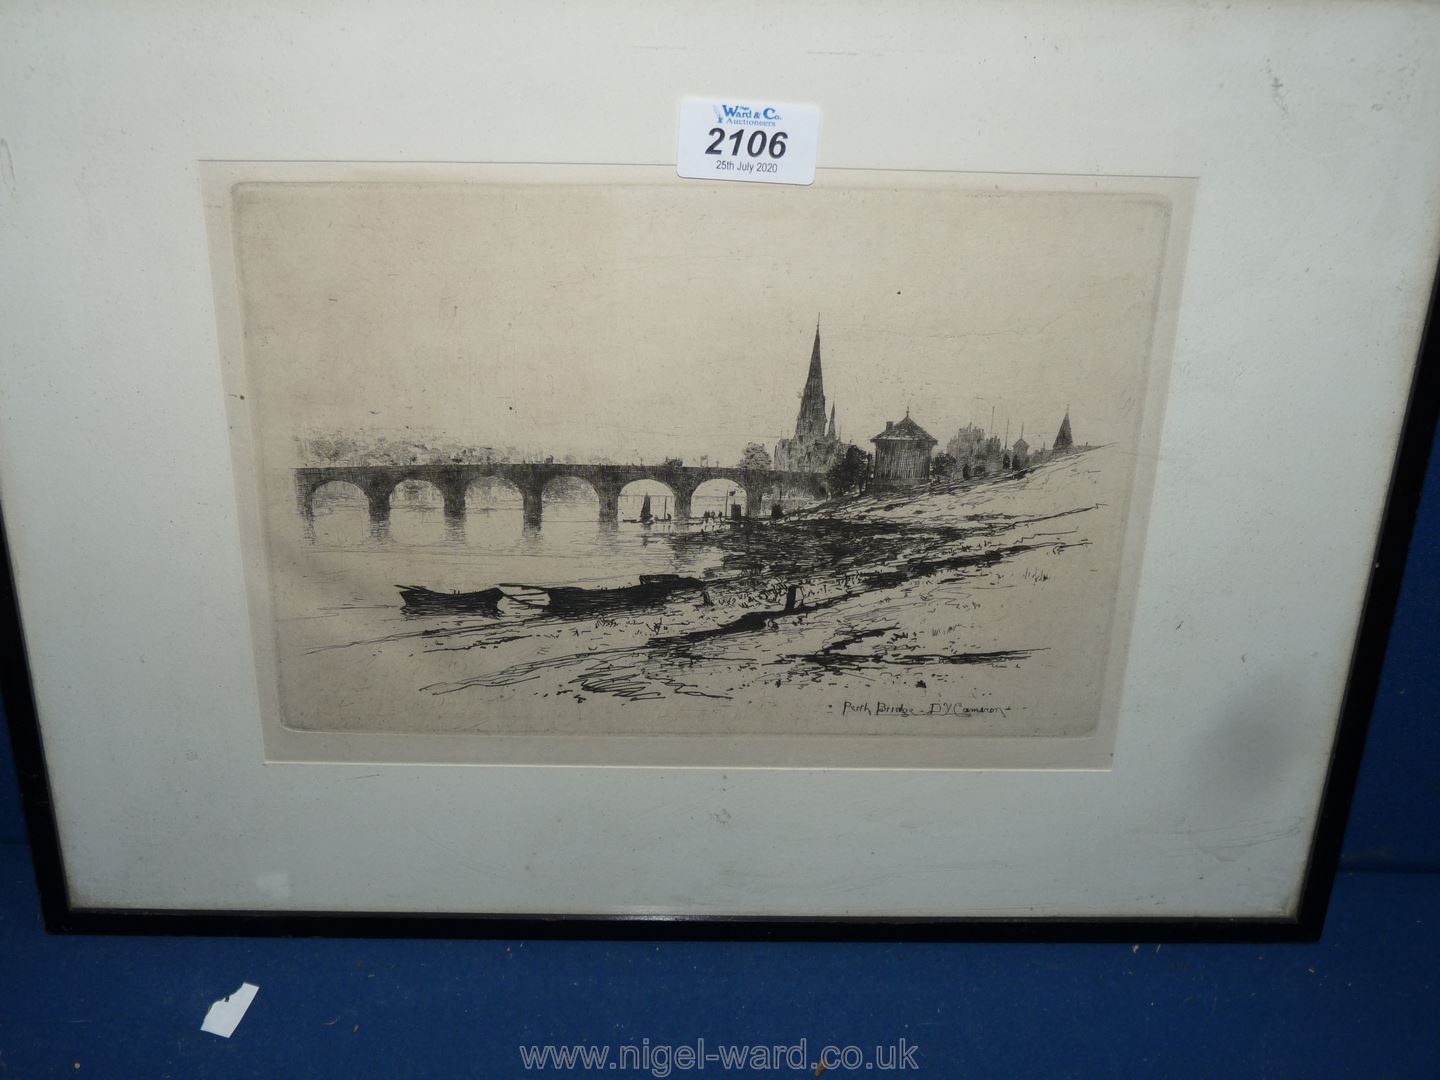 A framed and mounted Etching of Perth Bridge by D.Y.